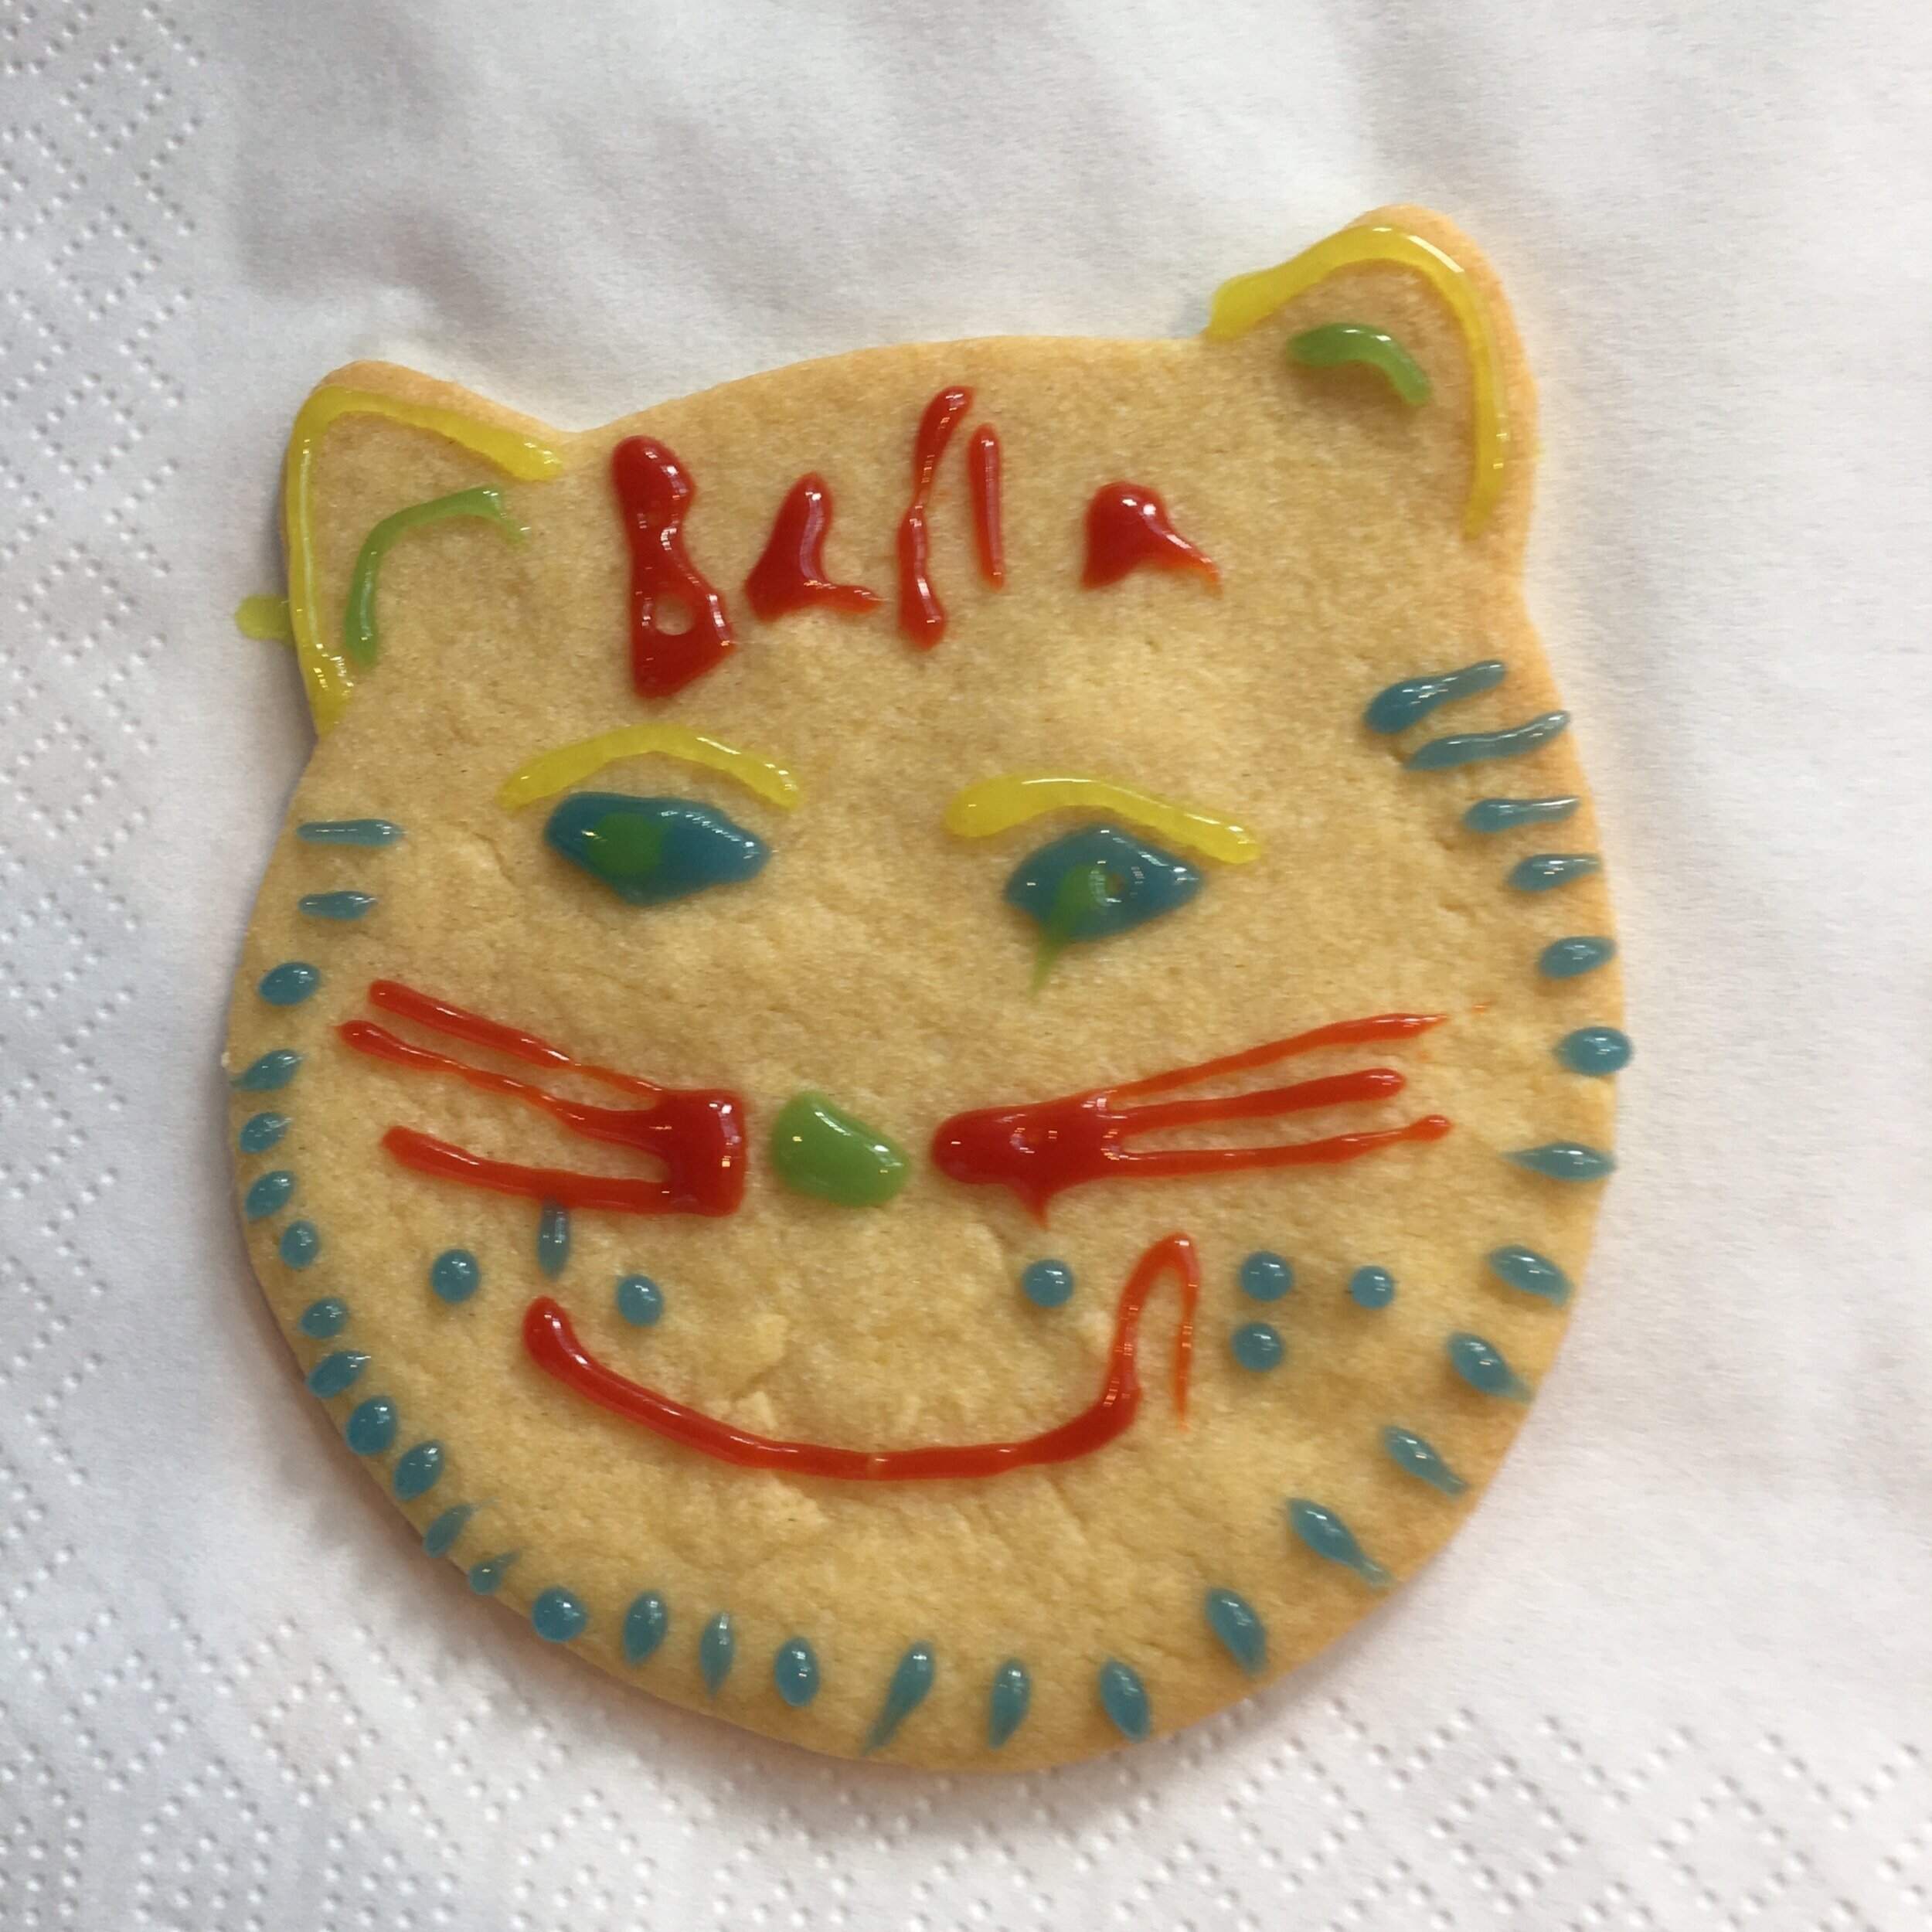 One of the 450 cat-shaped cookies made for my launch party! I like the smiley & yummy version of me with red whiskers.